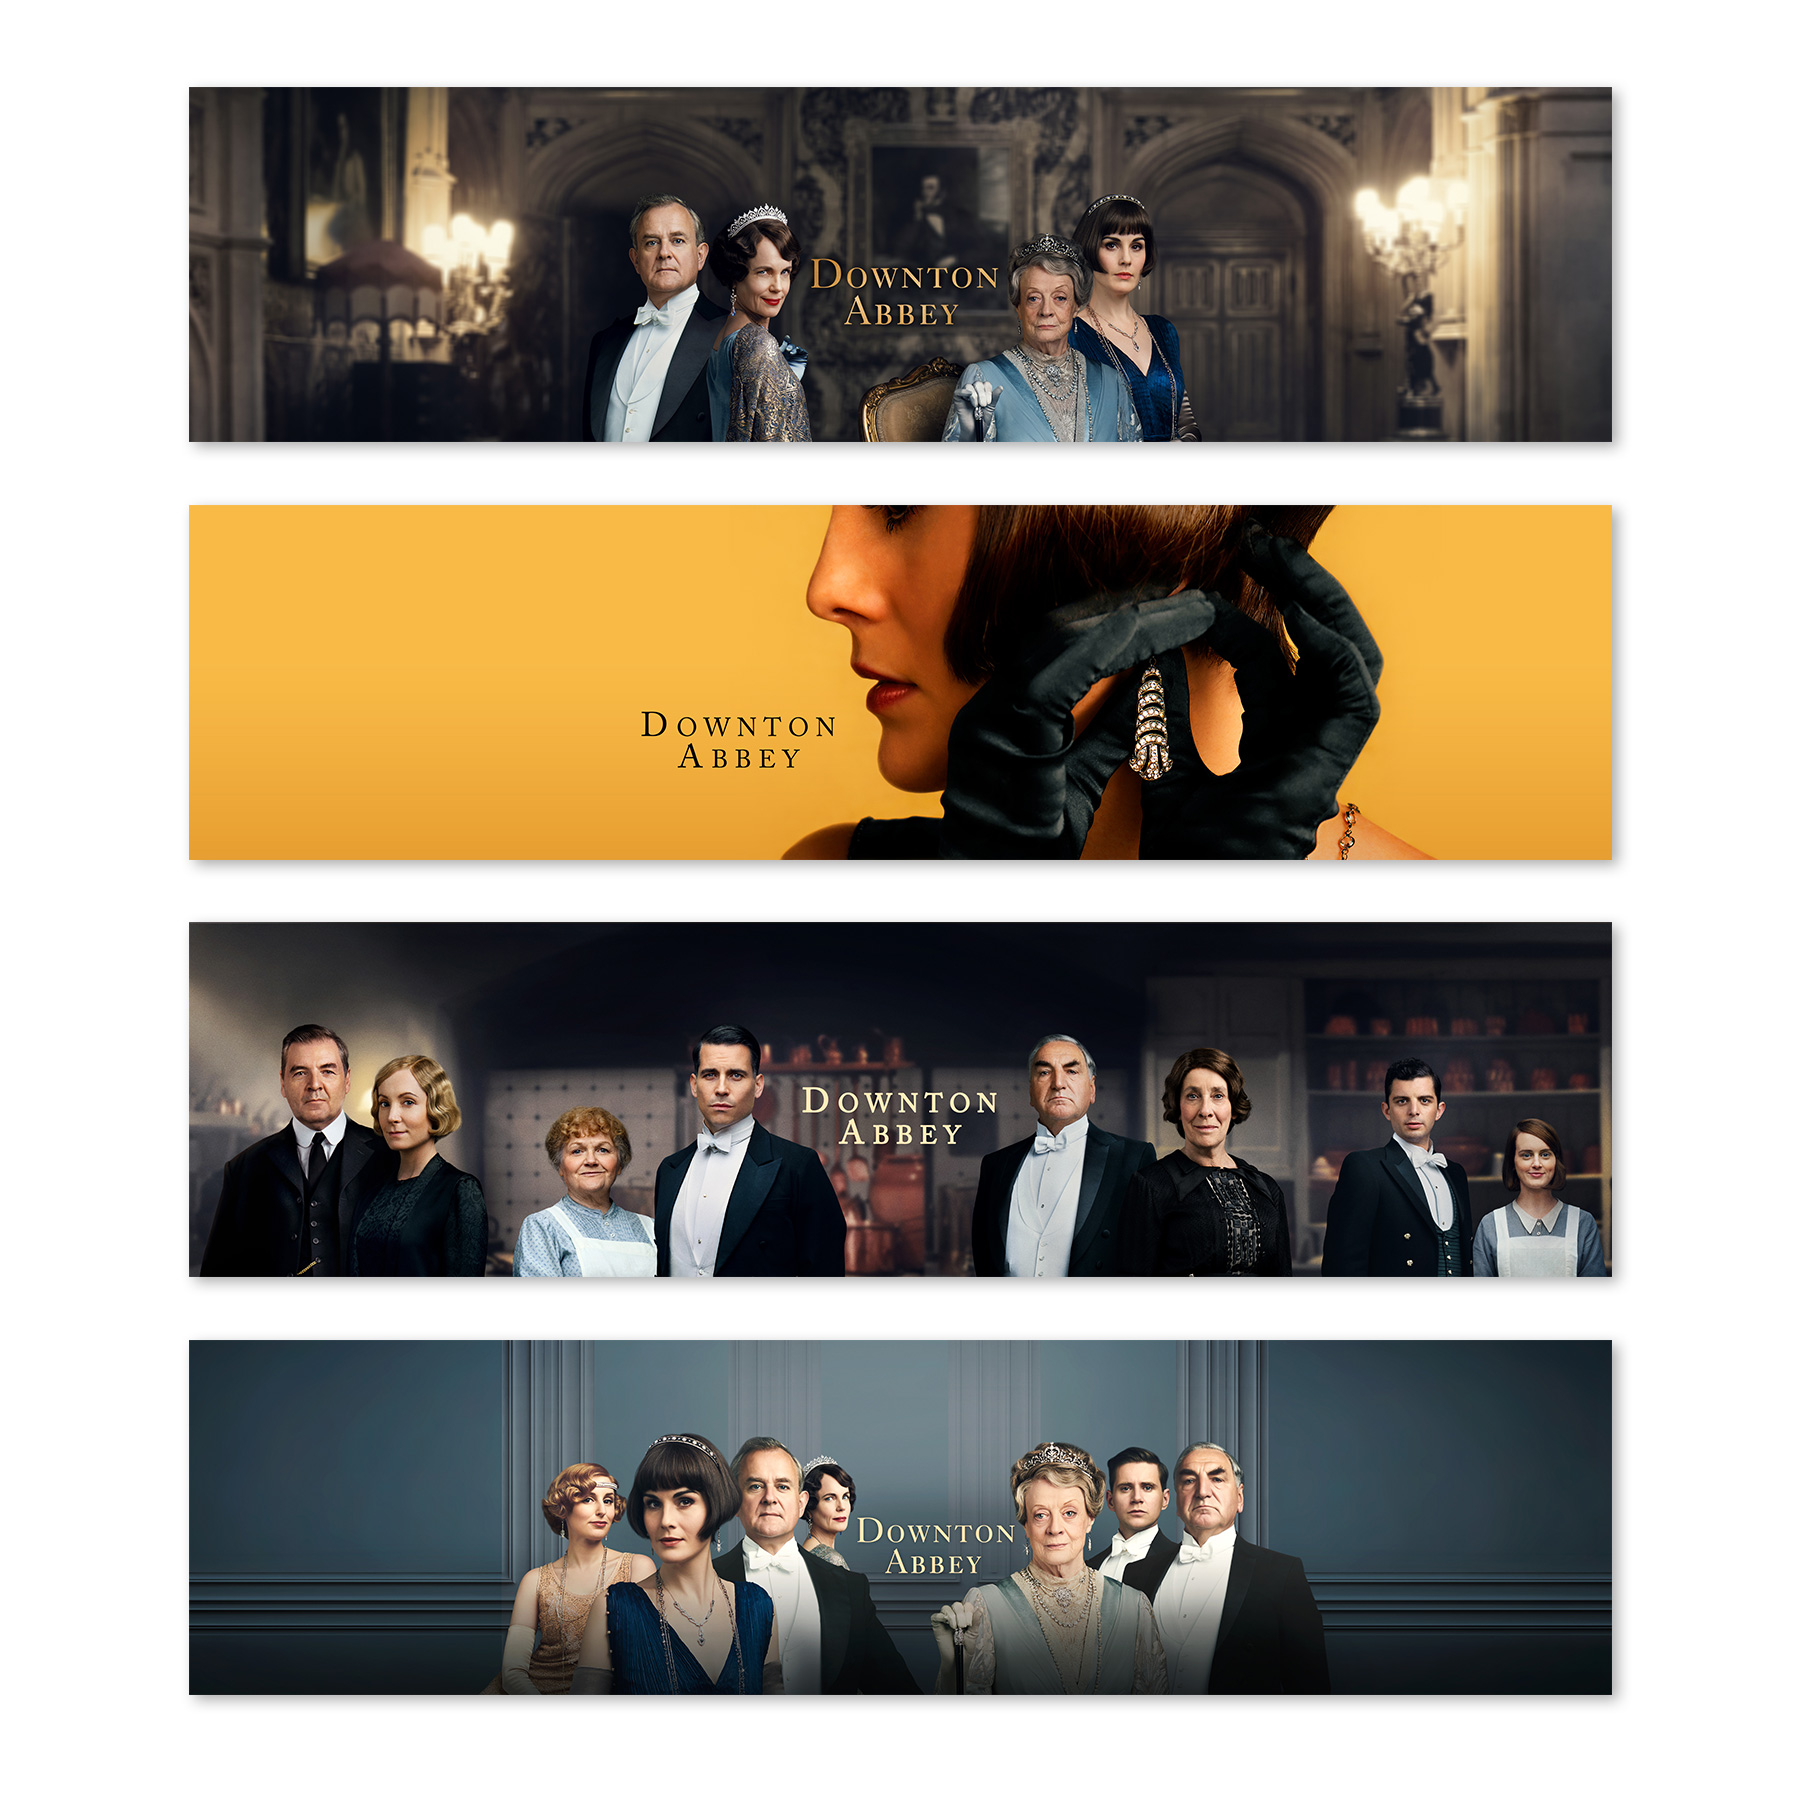 Downton Abbey iTunes Banner Ads